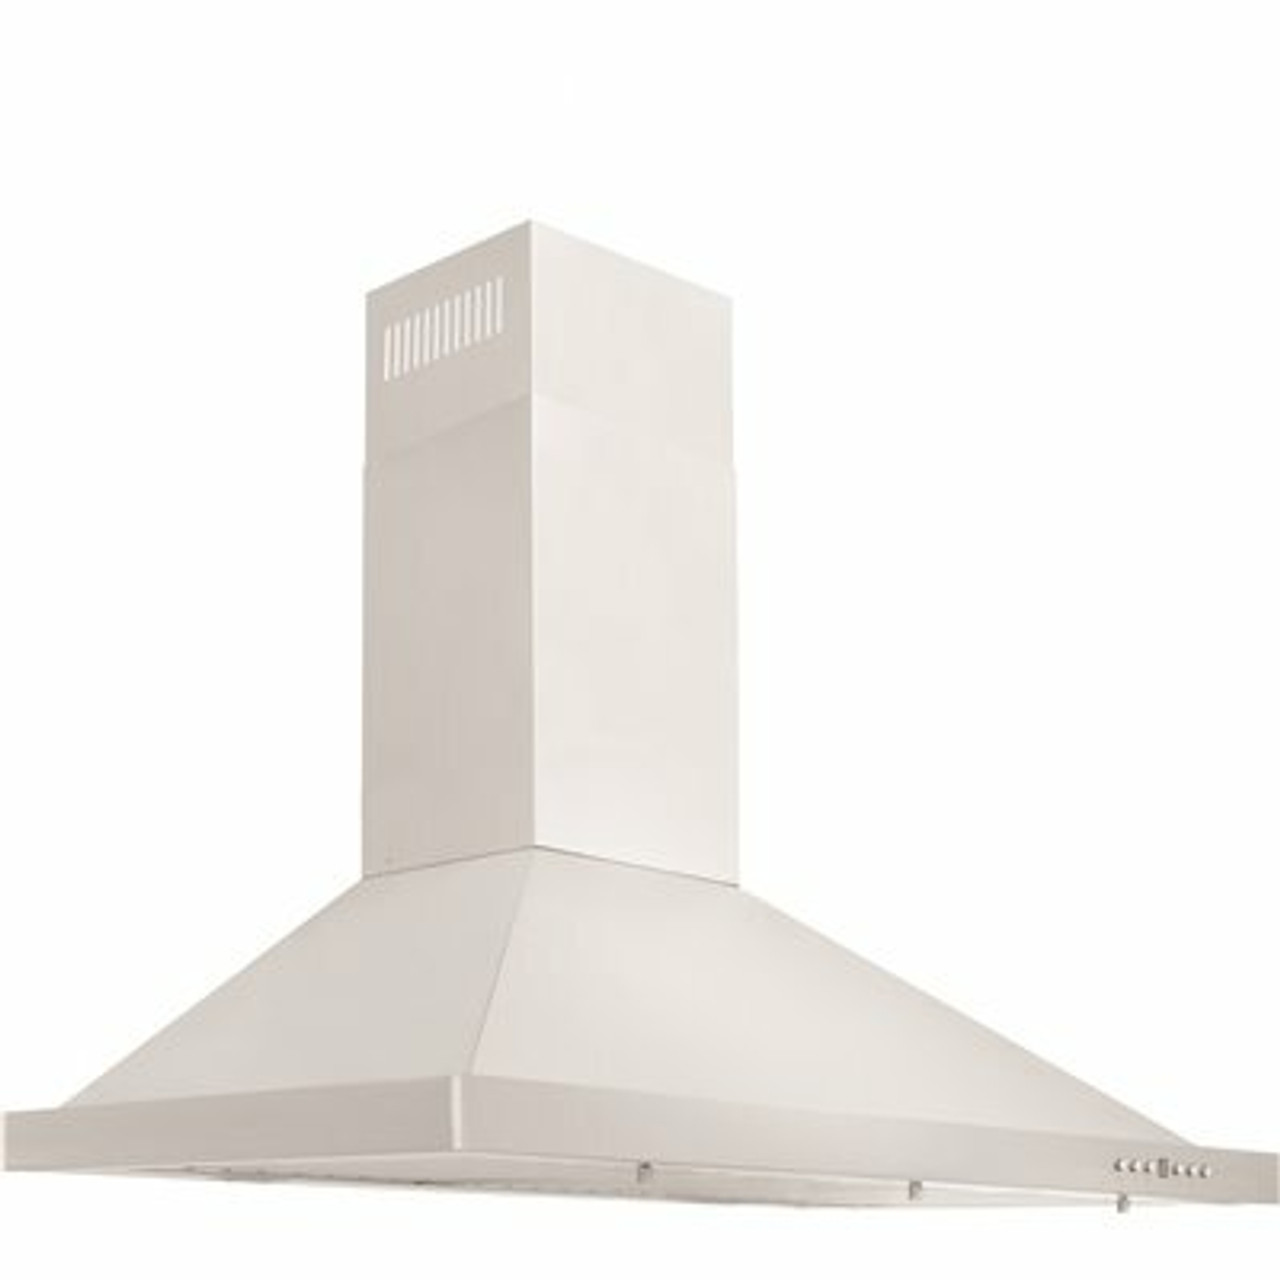 Zline Kitchen And Bath 30 In. Convertible Vent Wall Mount Range Hood In Stainless Steel